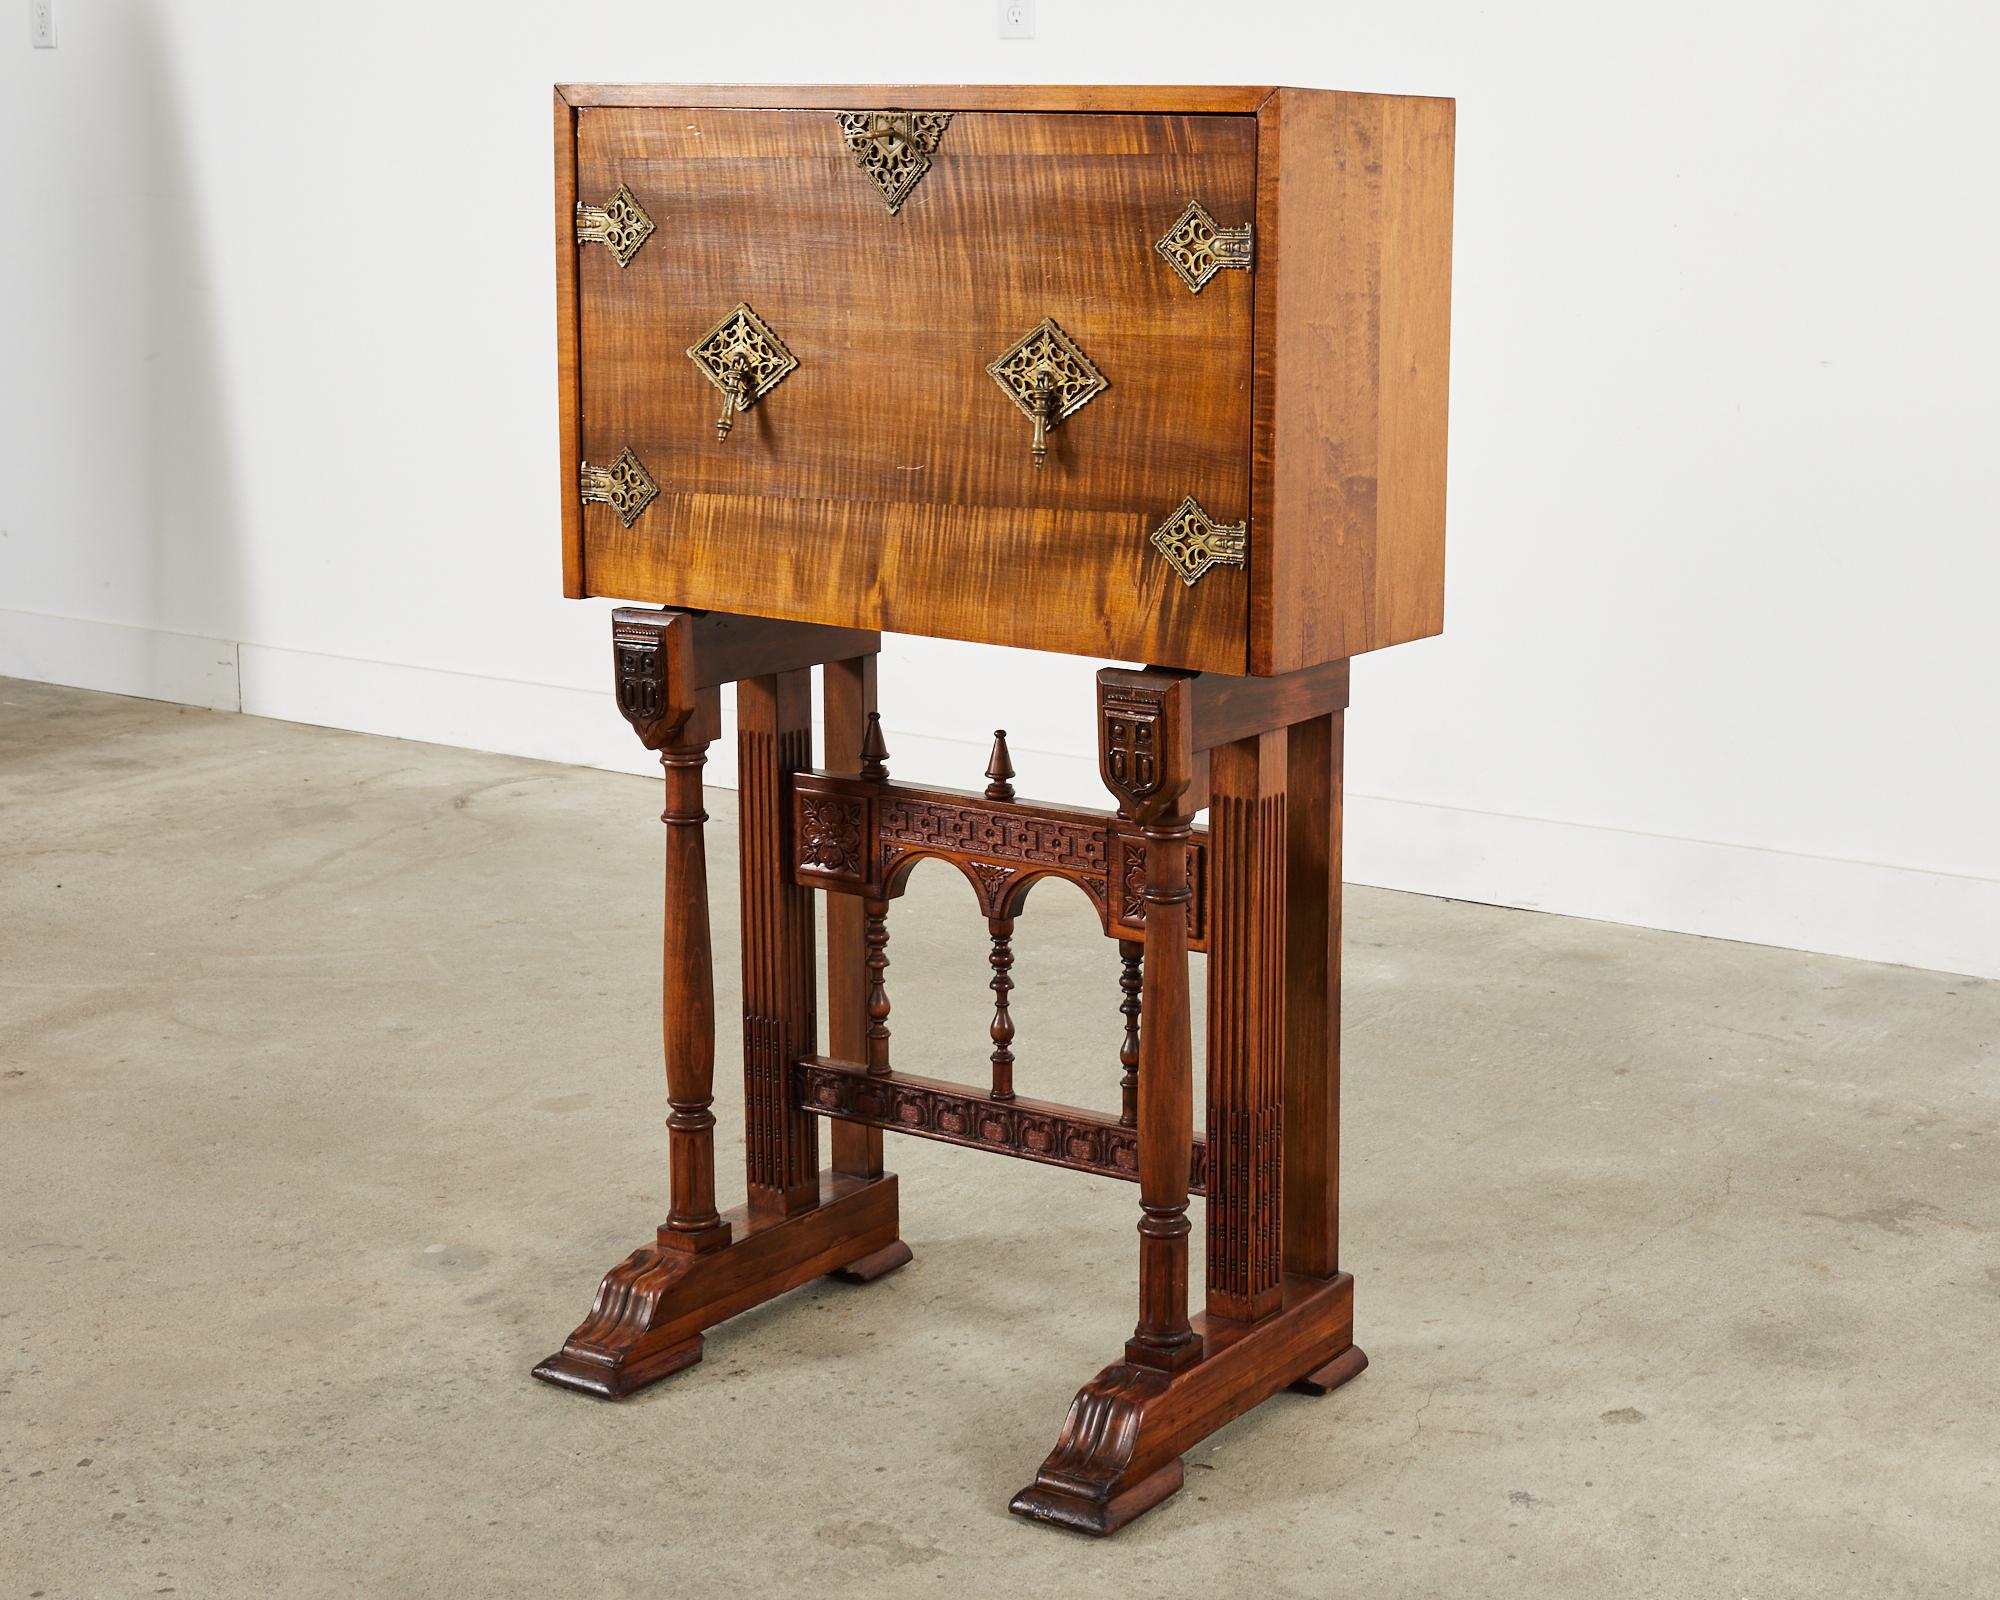 Hand-Crafted Spanish Baroque Style Walnut Vargueño Cabinet on Stand For Sale